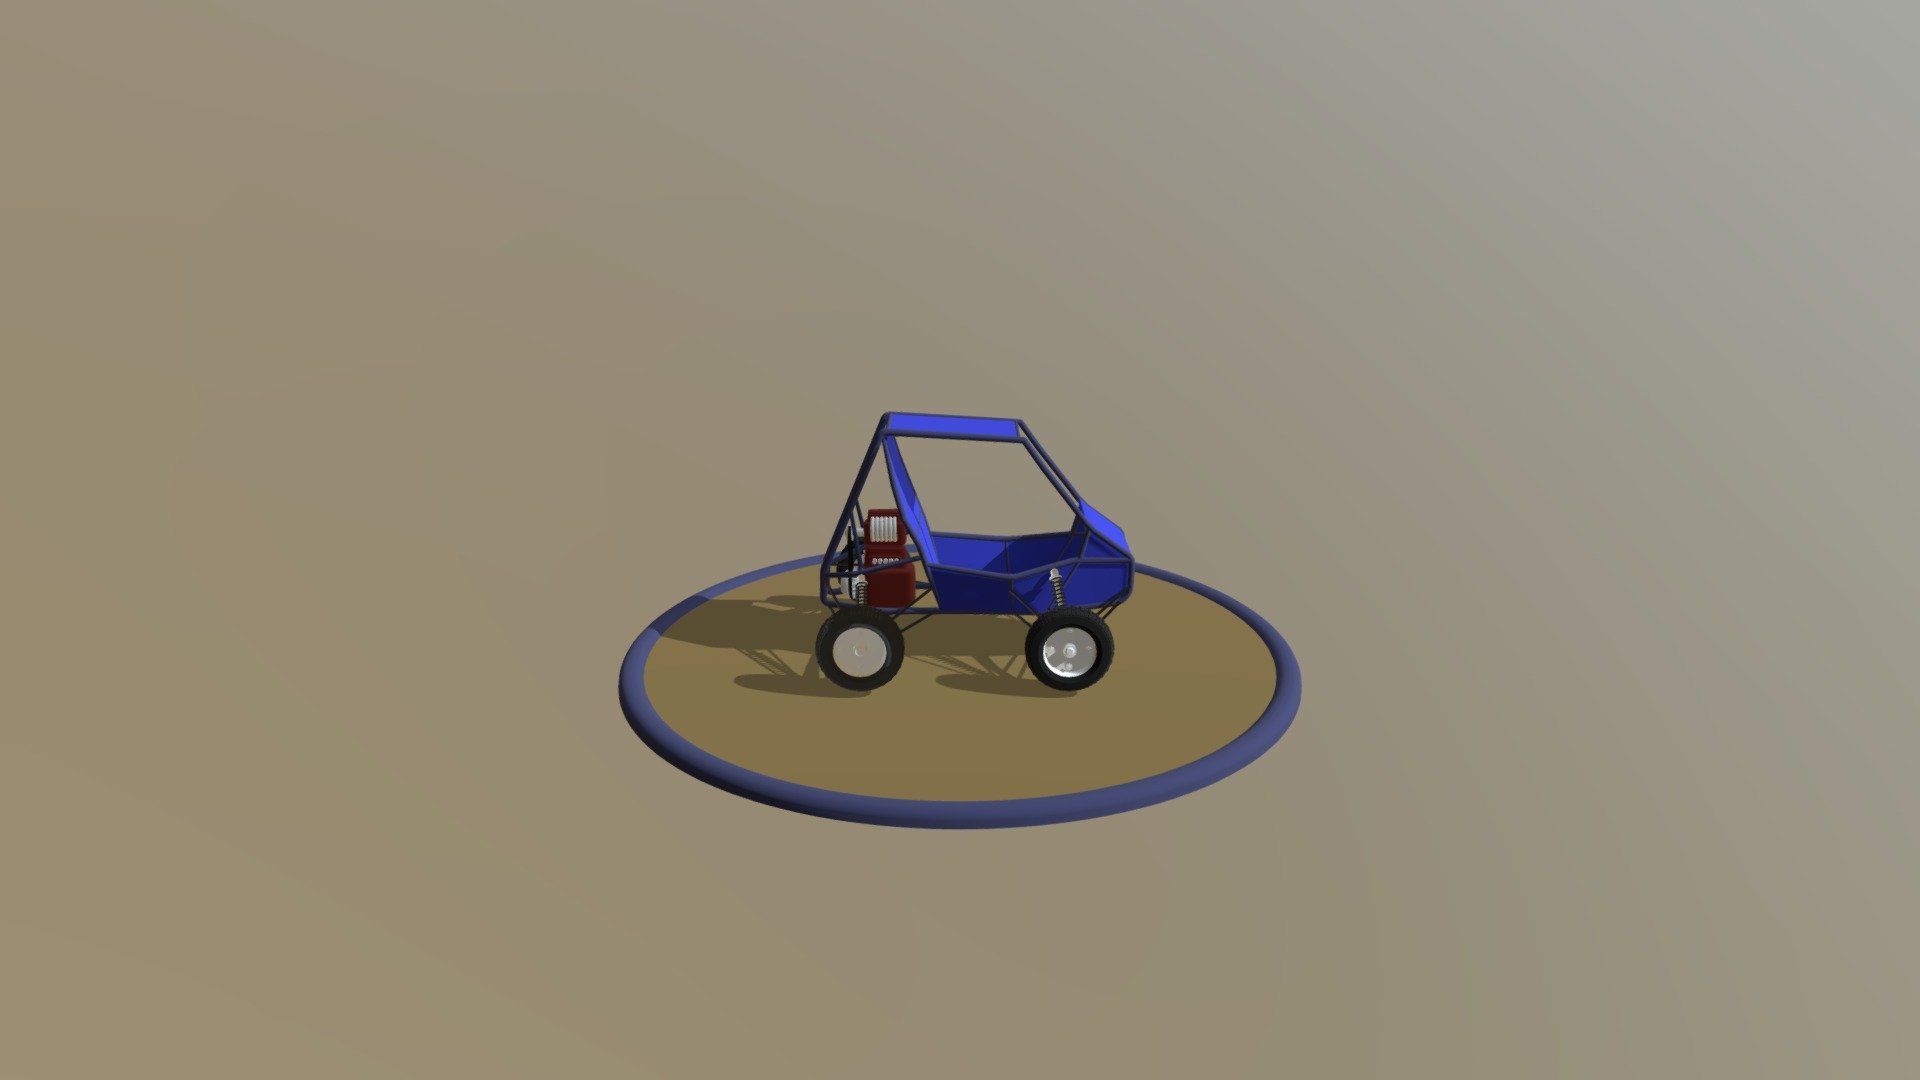 My first car off-road buggy Baja Sae Model - Baja Sae Model Buggy - 3D model by jacksonemanuell 3d model